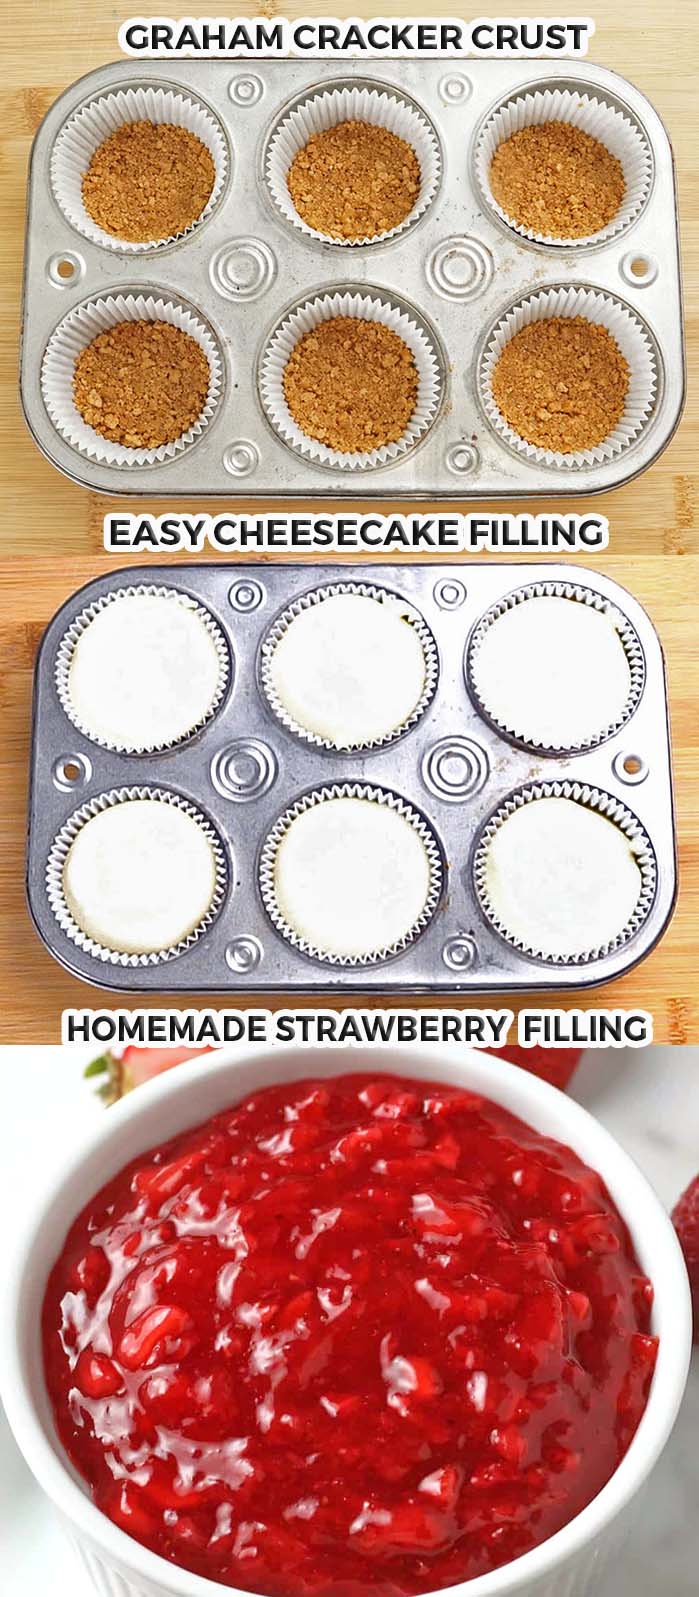 Strawberry Mini Cheesecakes – a perfect way to make a bite-sized version of your favorite cheesecake, a must make for Memorial Day, Father’s Day, or any spring or summer cookout.